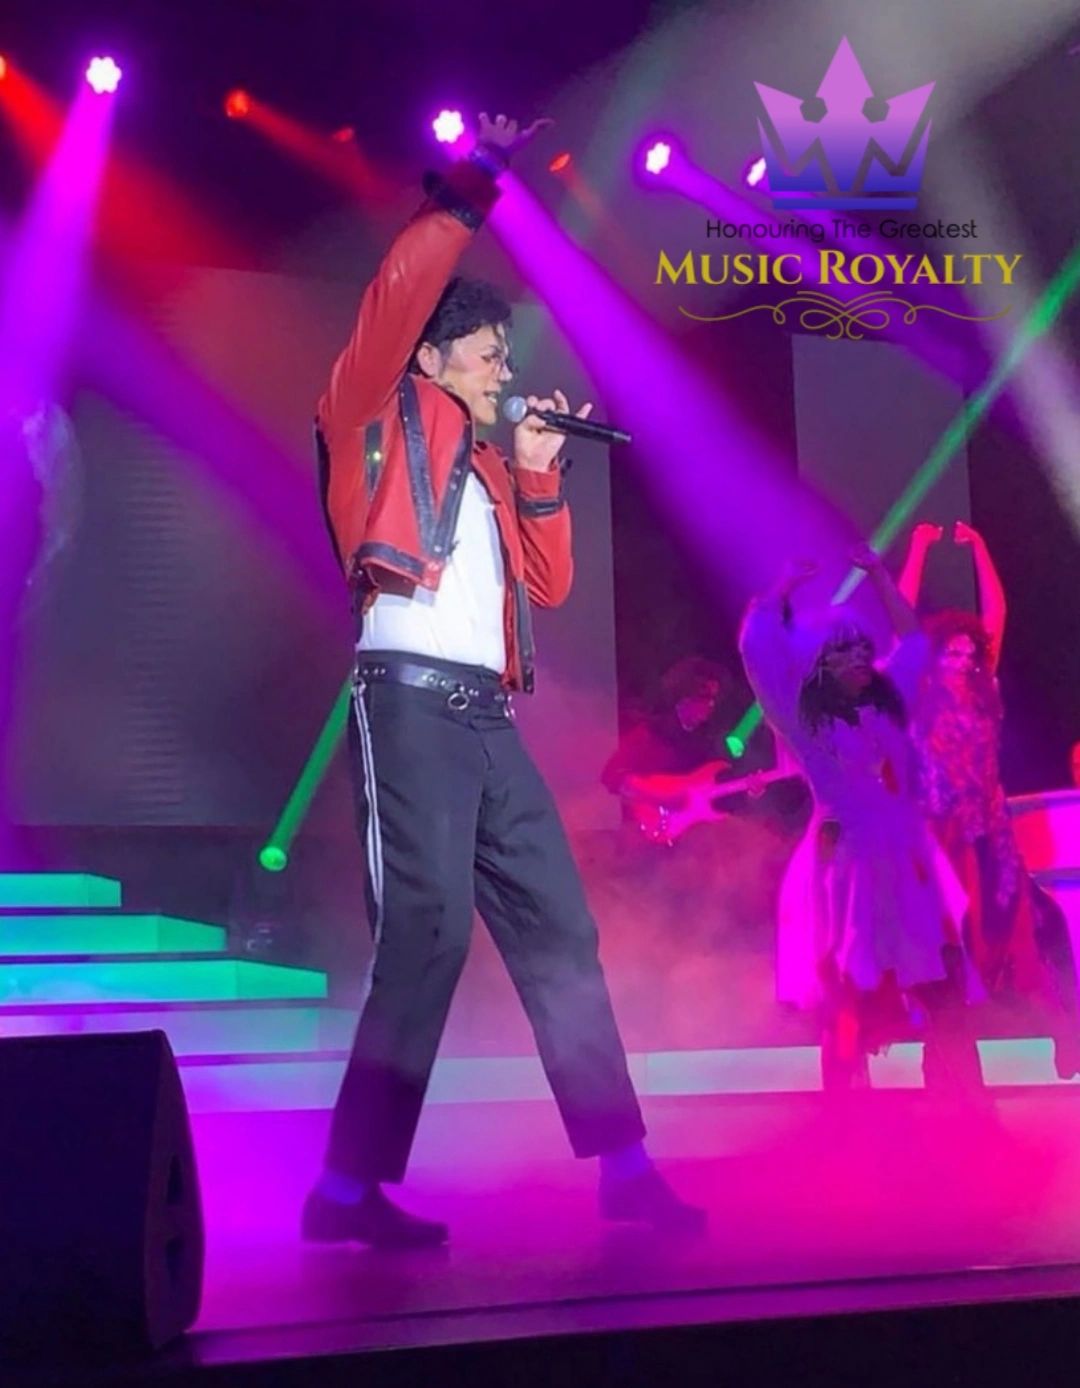 Incredible Michael Jackson Tribute J Lucas performs Thriller with dancers